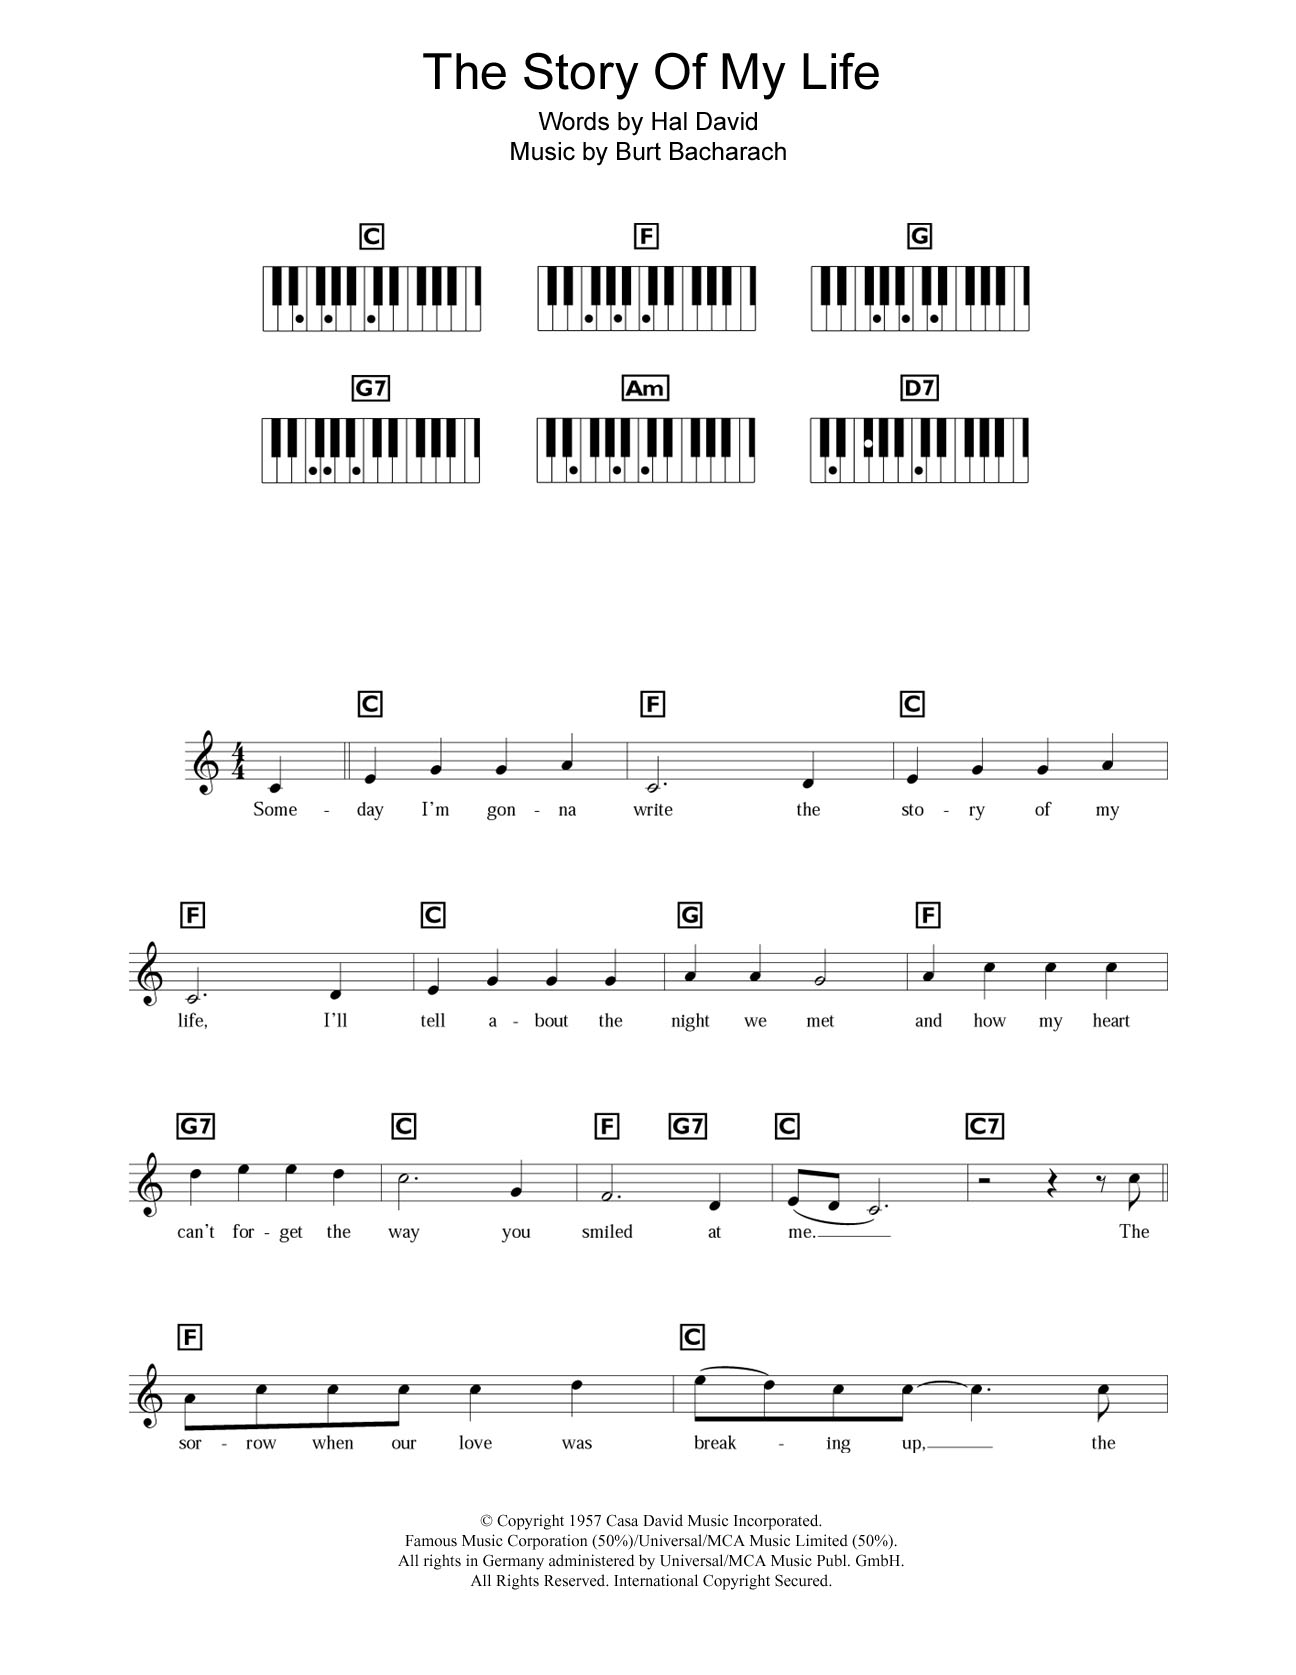 Story Of My Life Chords The Story Of My Life Burt Bacharach Piano Vocal Guitar Digital Sheet Music